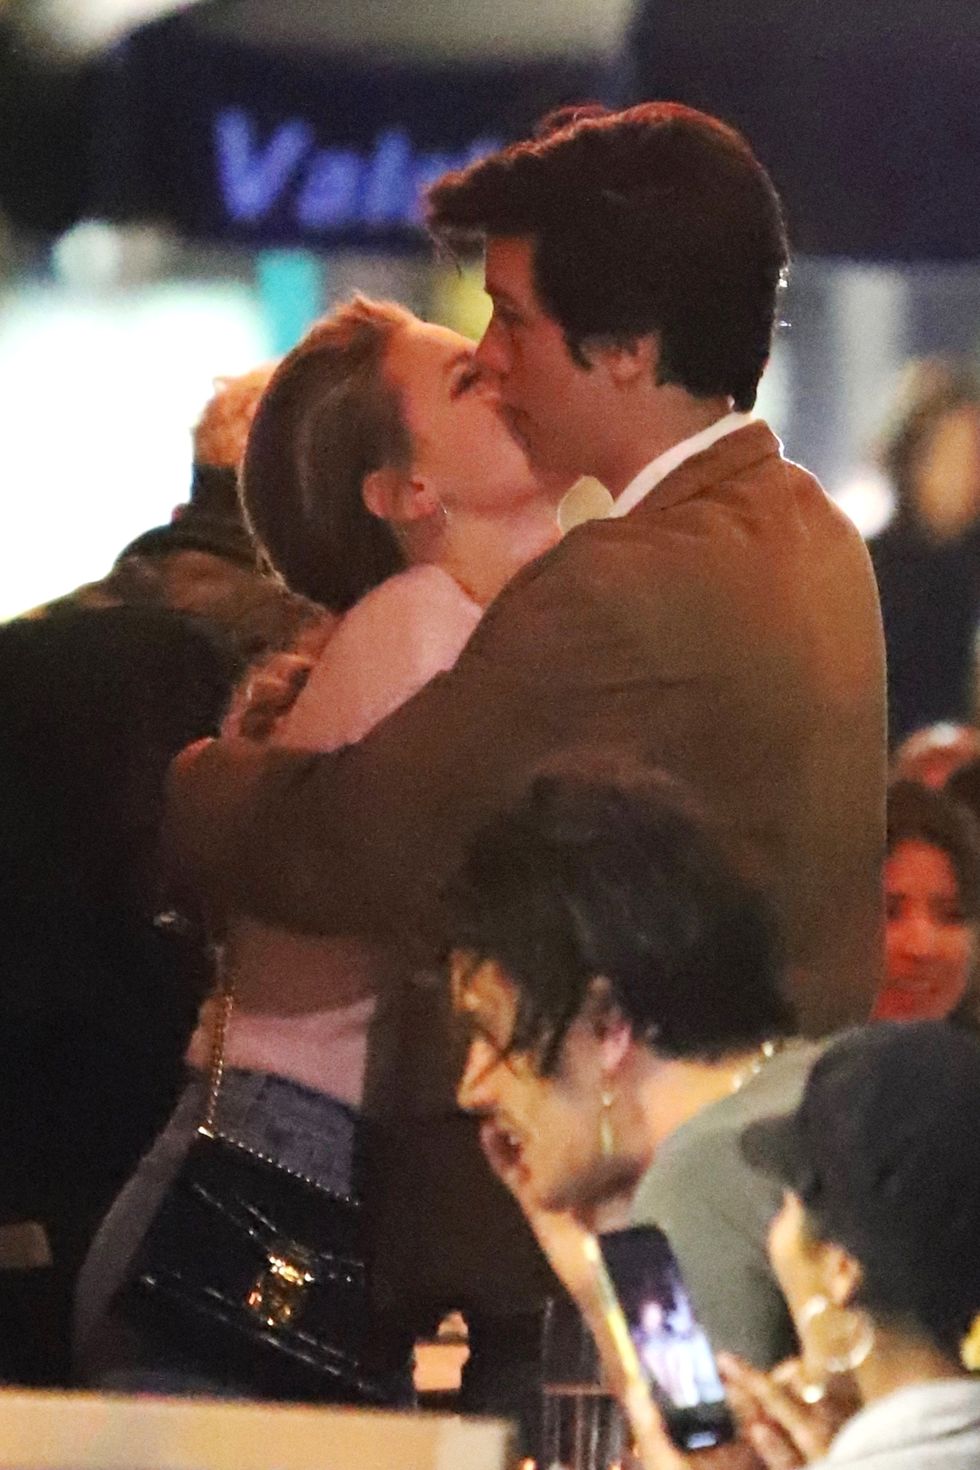 Cole Sprouse And Lili Reinharts Relationship Timeline Jughead And Betty From Riverdale Dating Irl 